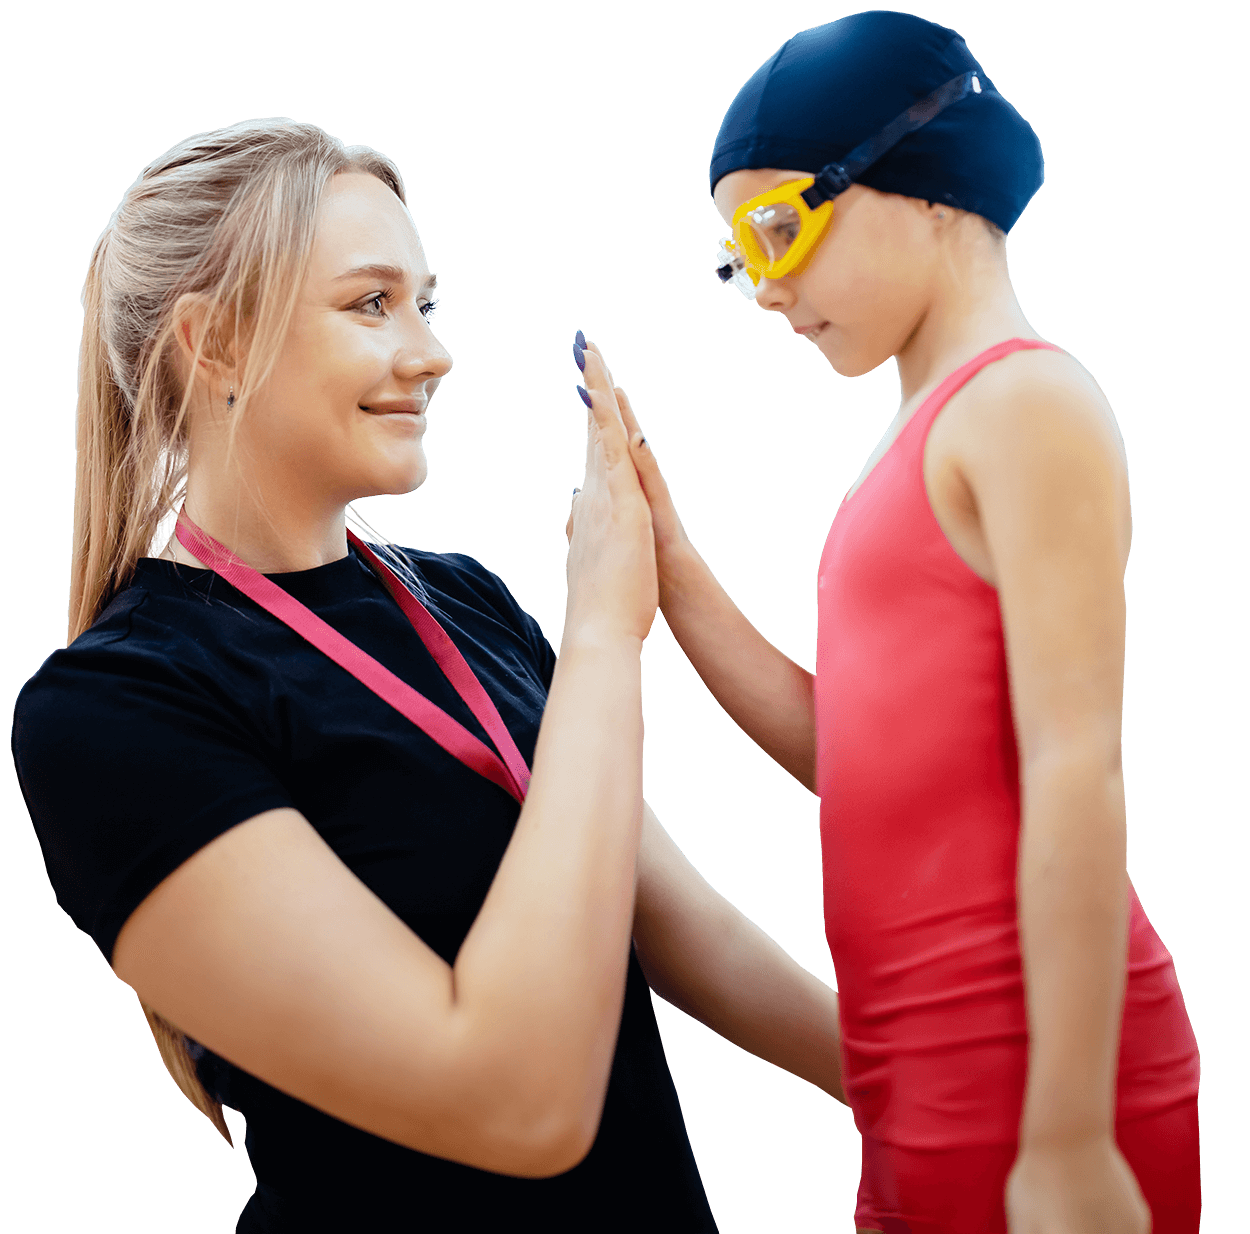 Swim coach giving a high five to a young swimmer.